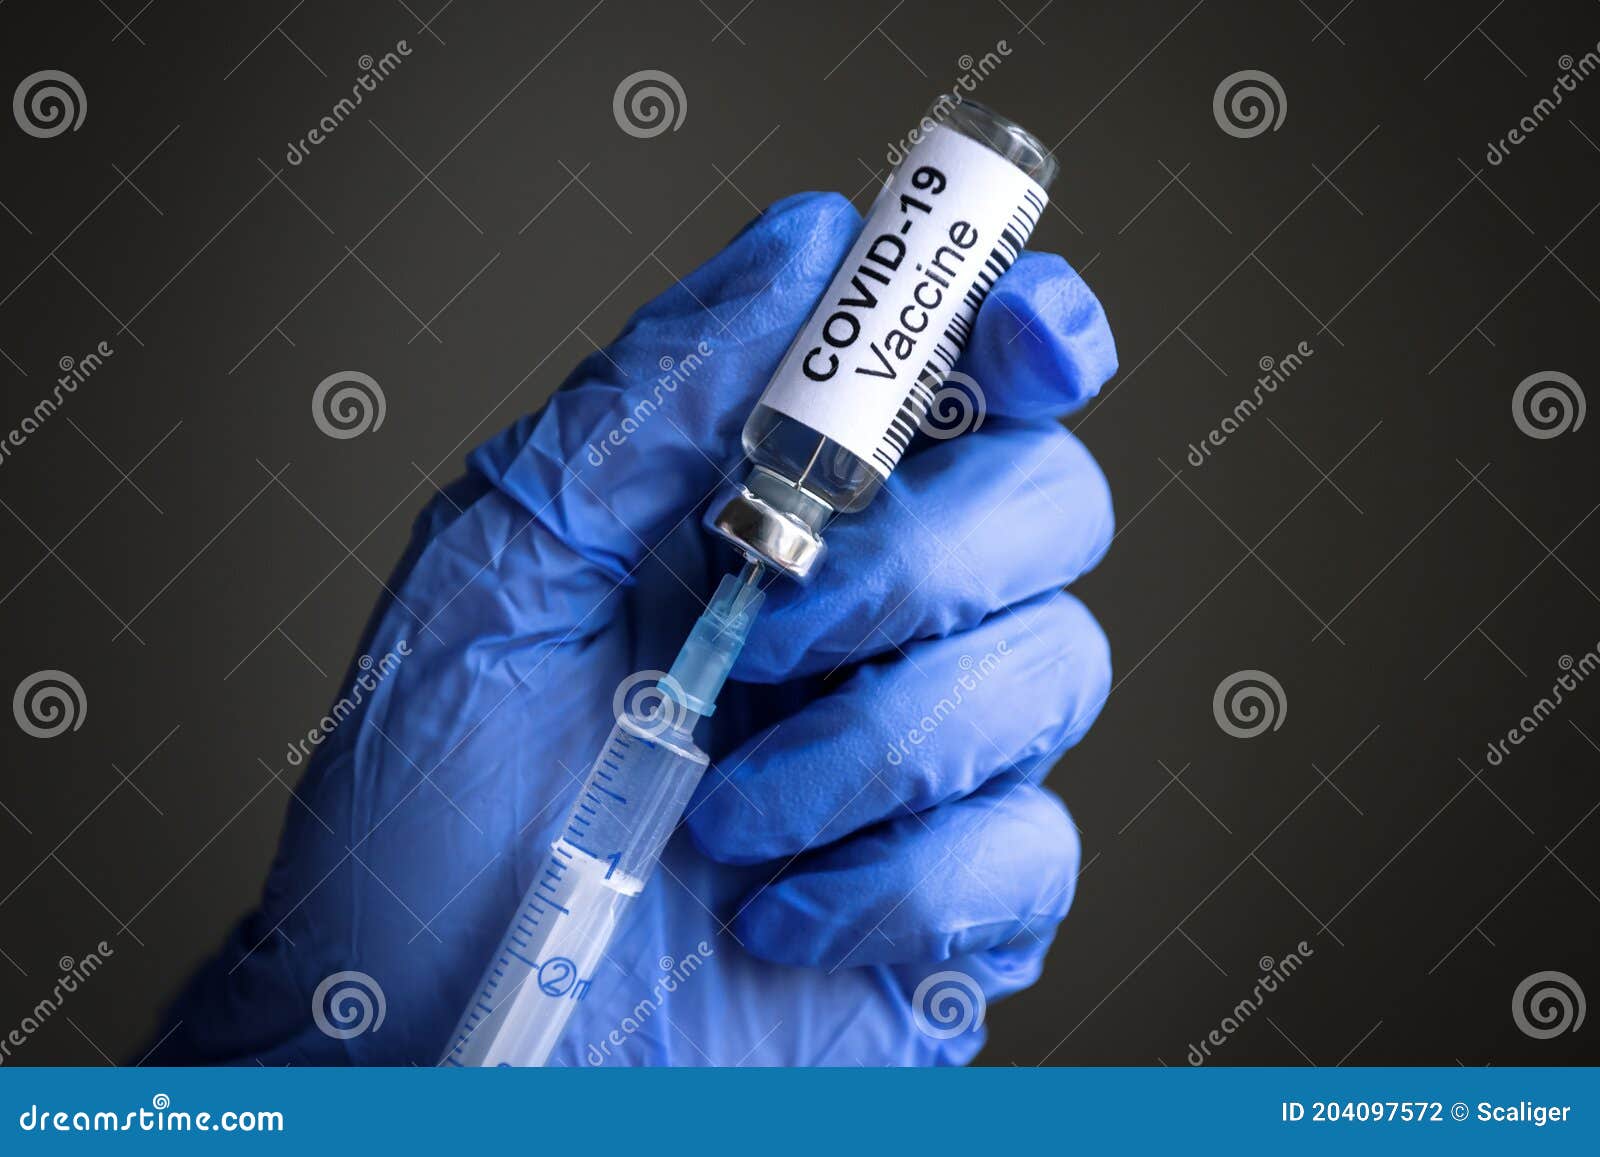 coronavirus vaccine bottle and syringe for covid-19 cure in doctorÃ¢â¬â¢s gloved hands